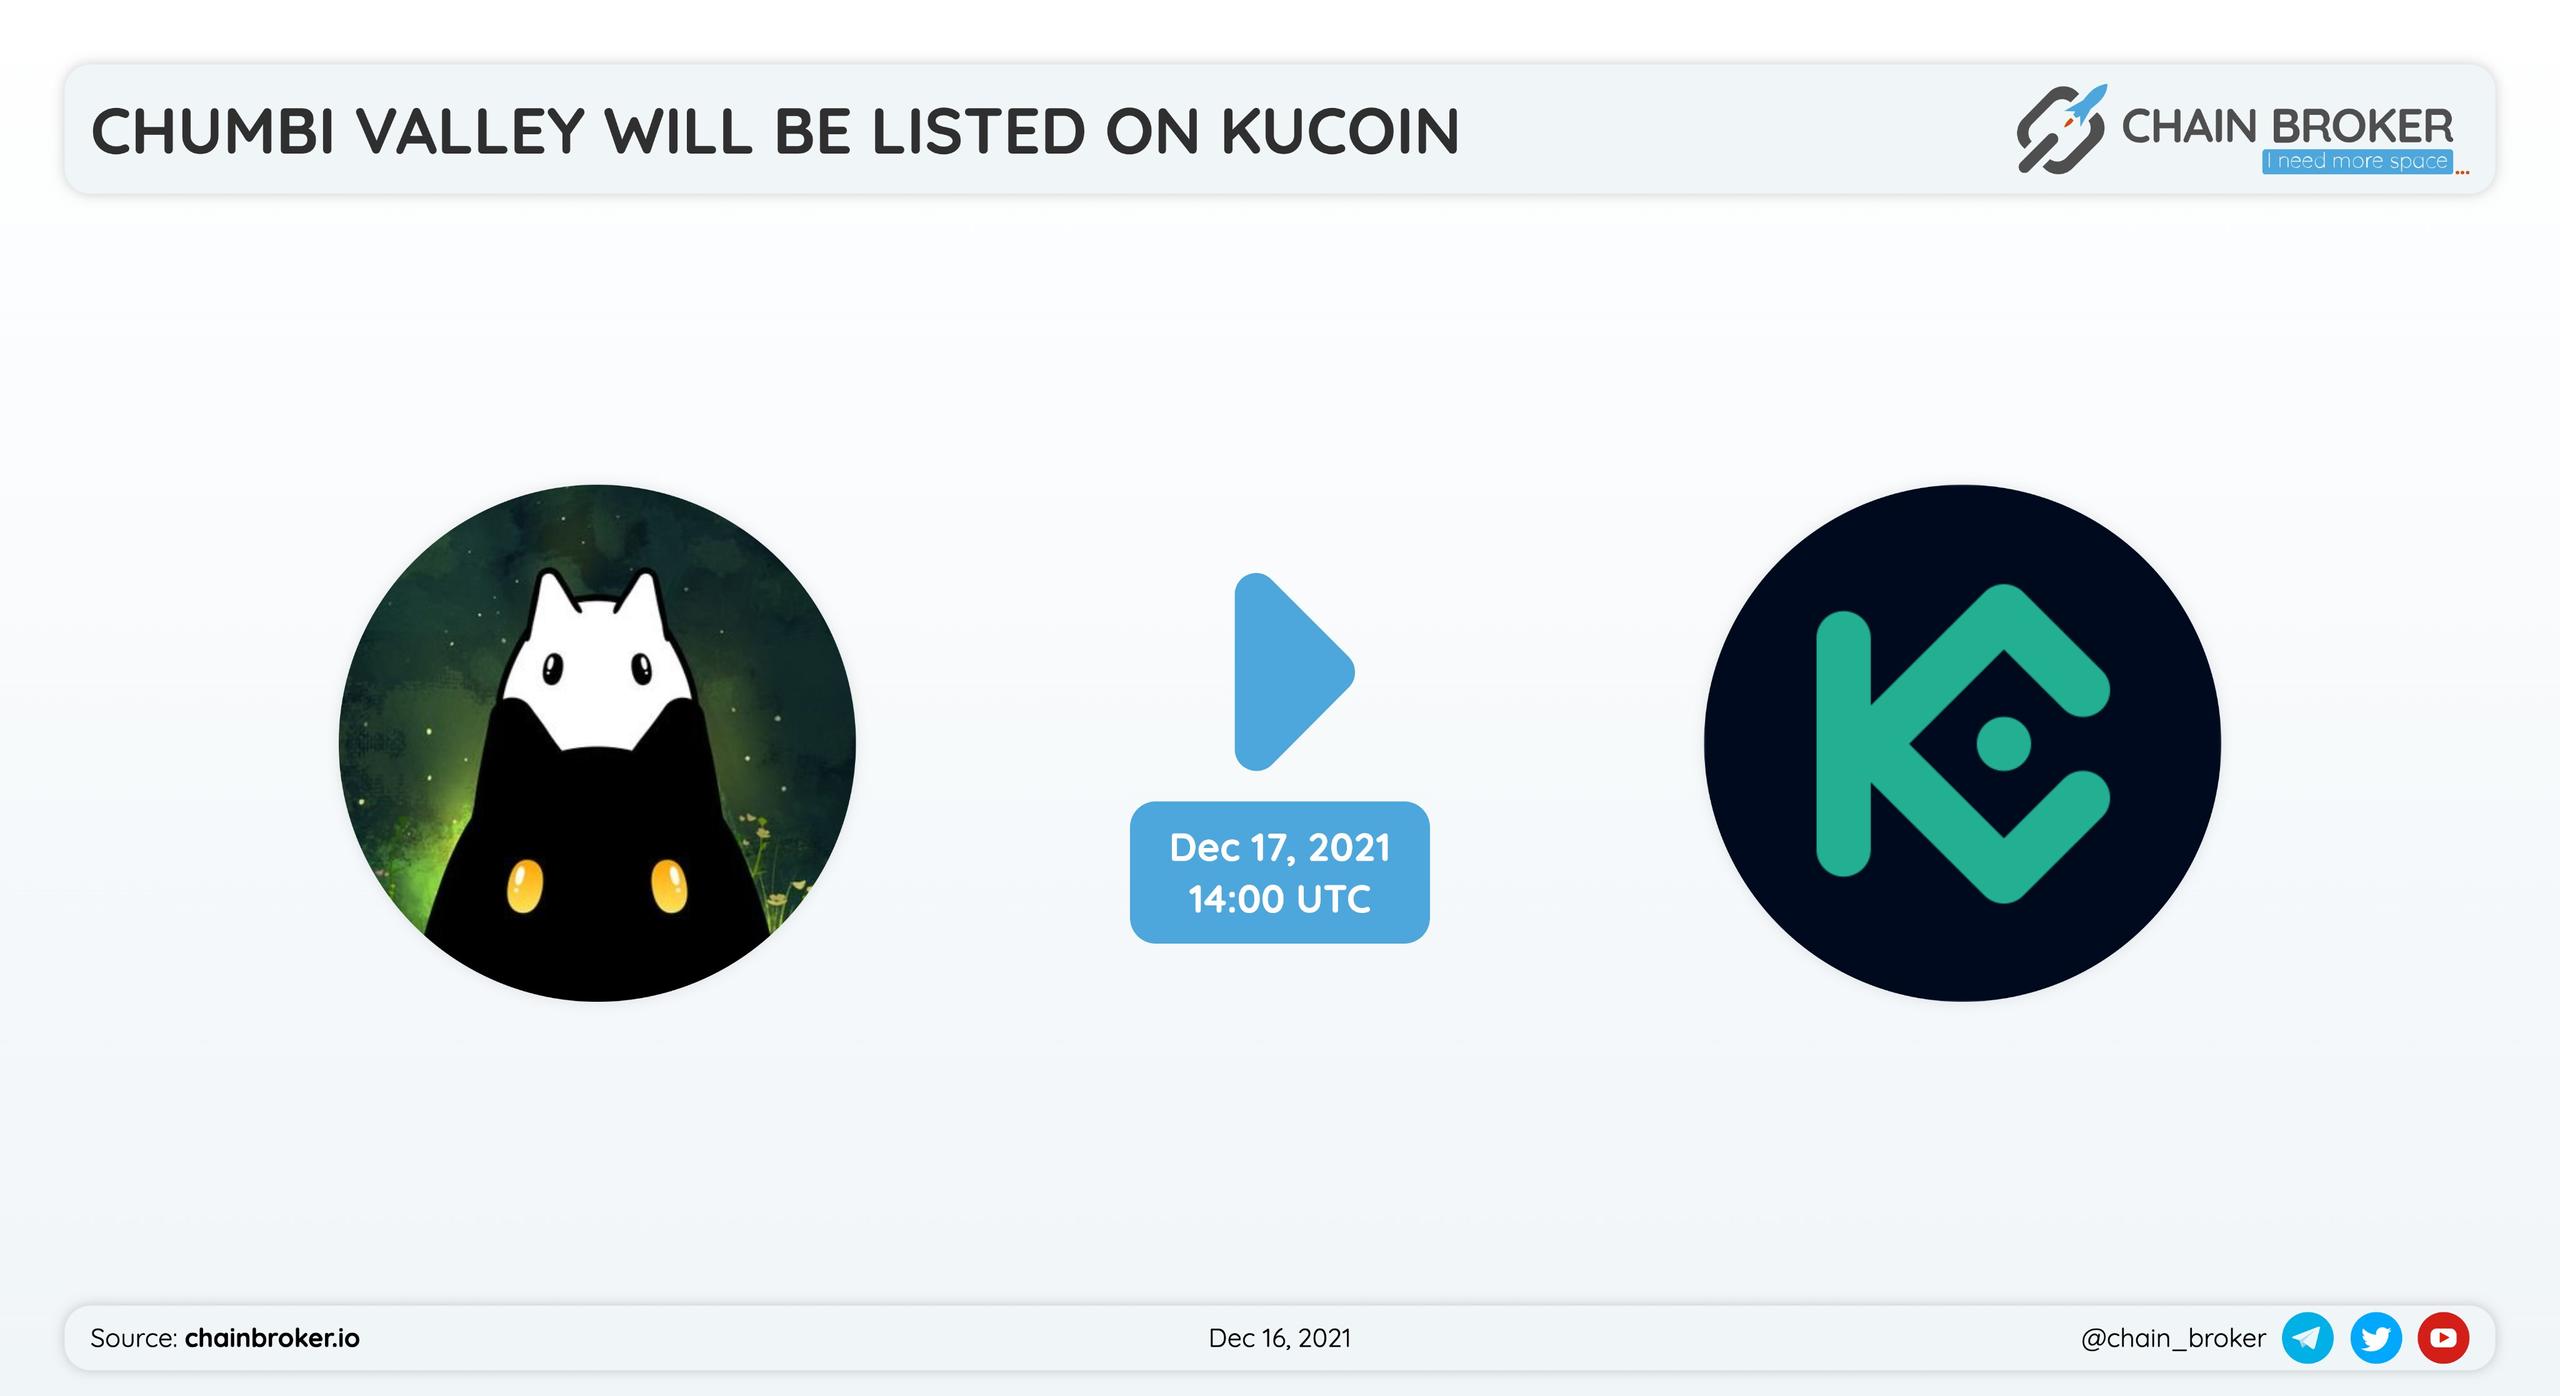 Chumbi Valley has partnered with Kucoin for token listing.